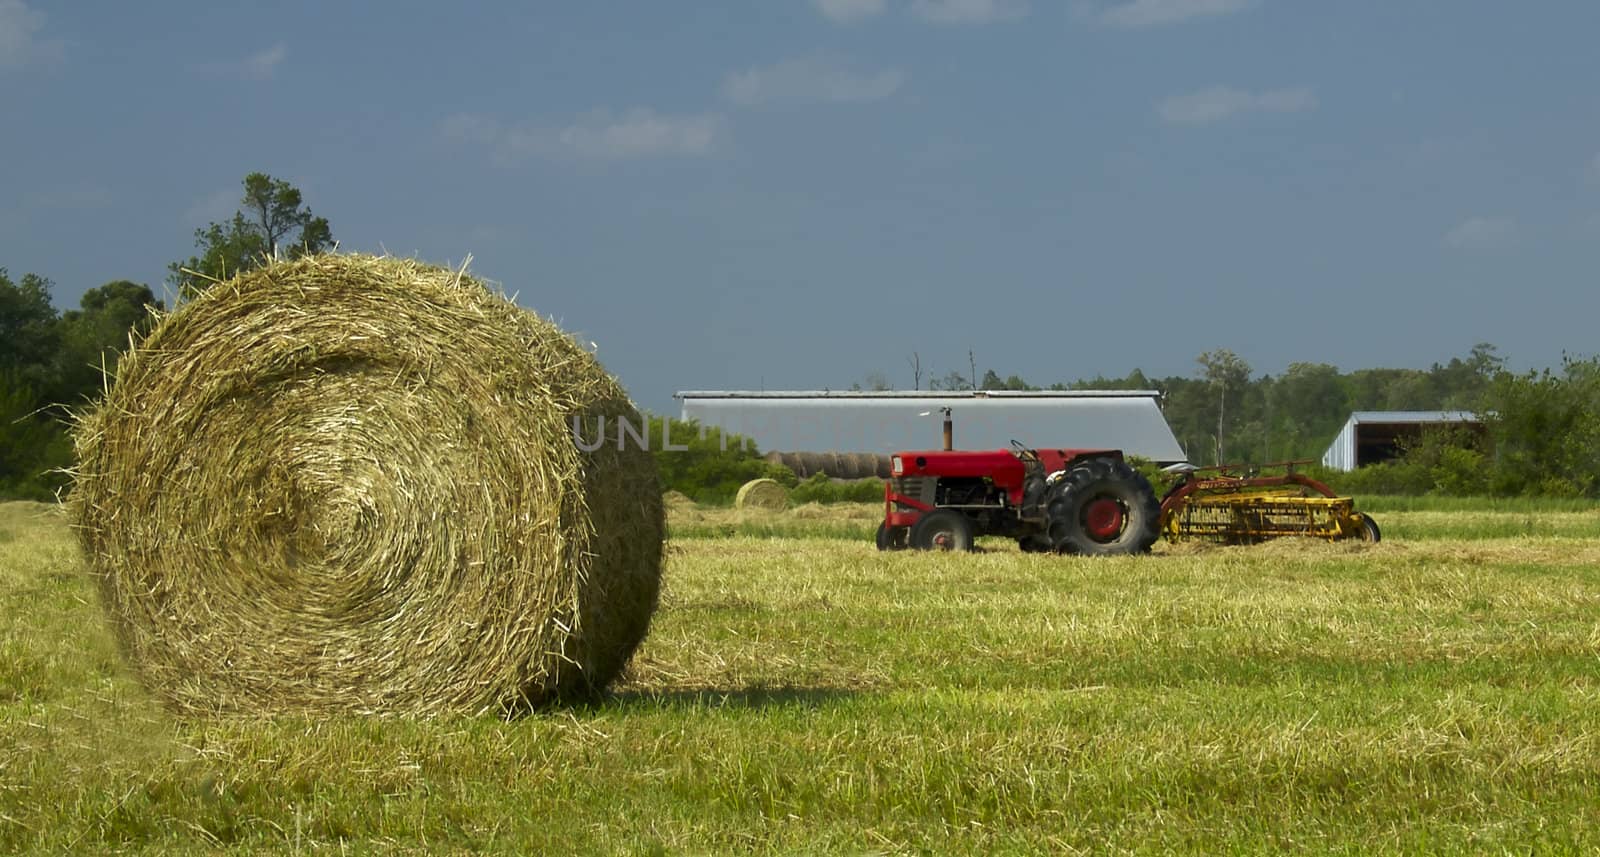 A hay bale and red tractor sit in a freshly mowed field